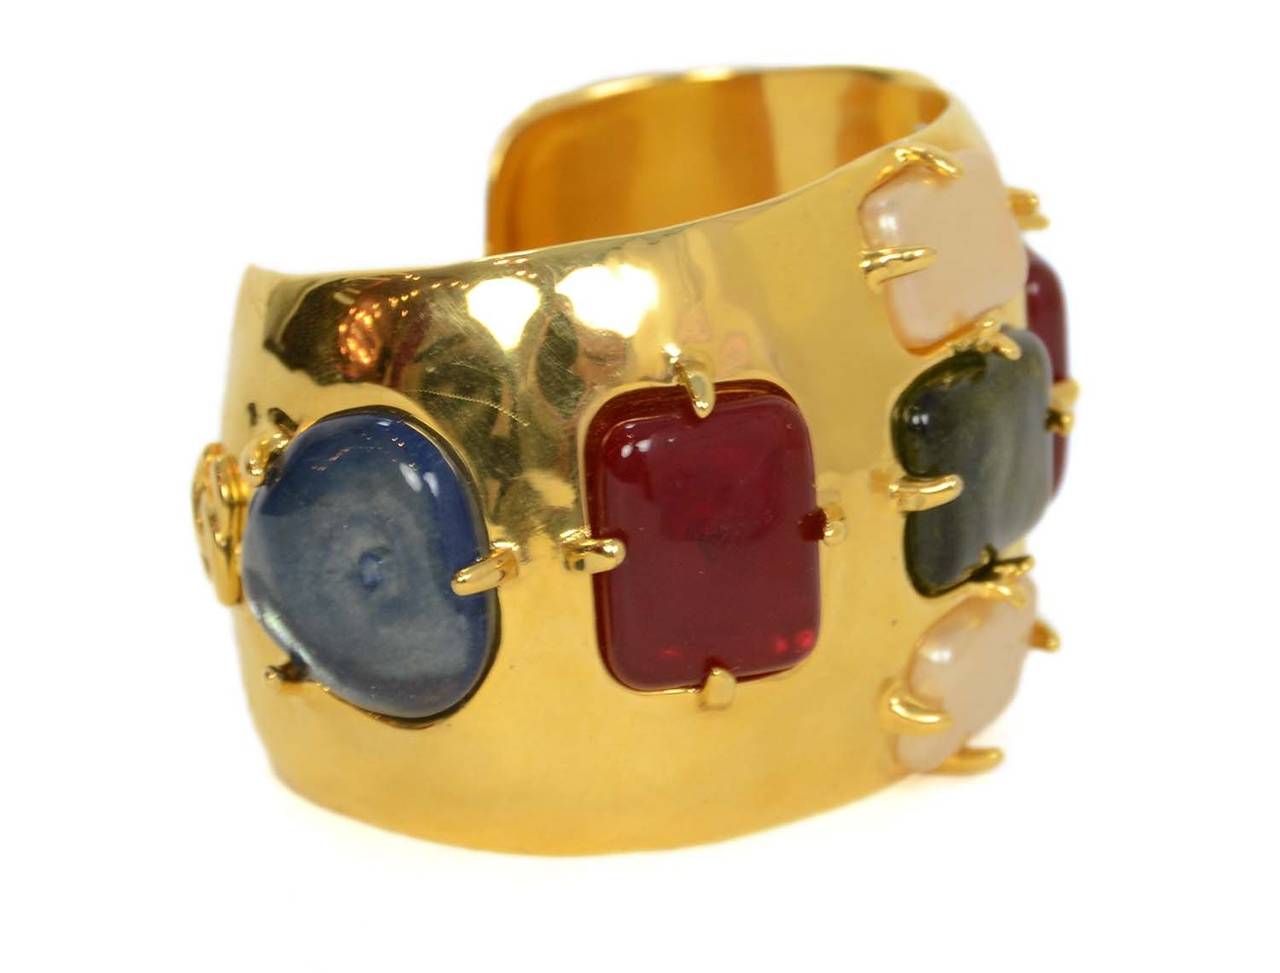 Chanel Vintage '97 Gold Cuff w/Red, Green, Blue & Ivory Stones

    Made in: France
    Year of Production: 1997
    Stamp: 97 CC A
    Closure: None
    Color: Gold, red, green, blue, and ivory
    Materials: Metal and poured glass
   